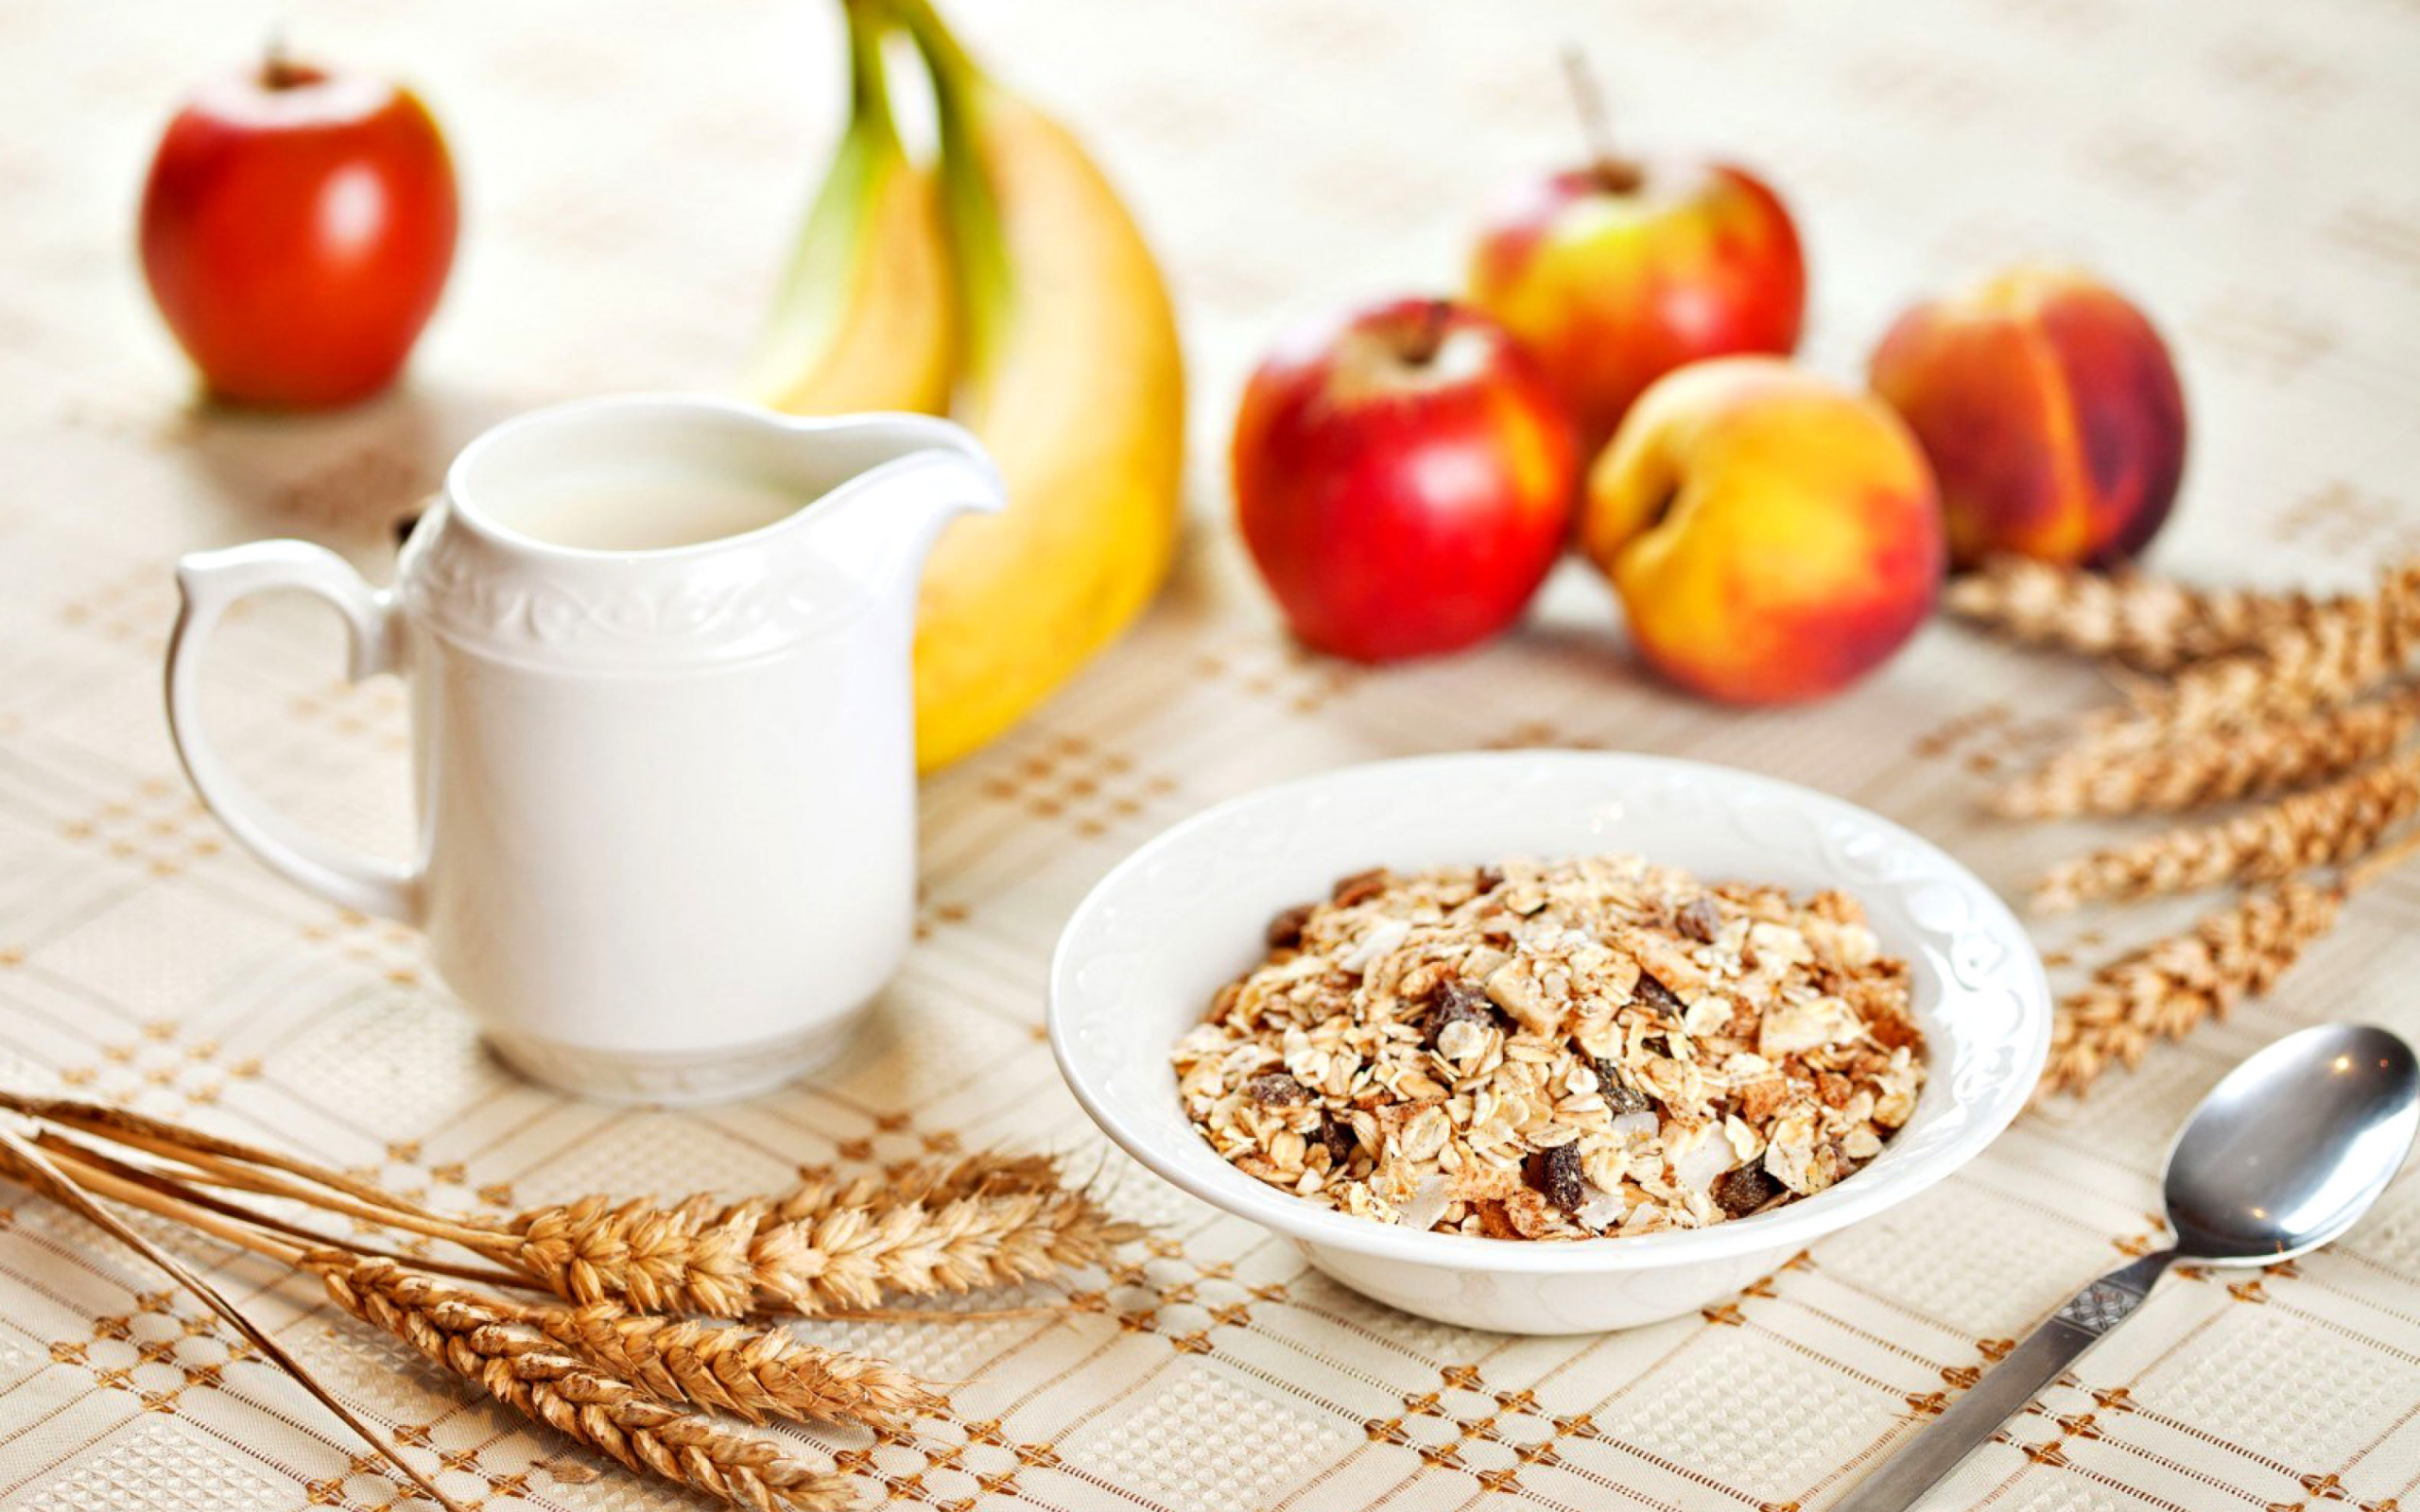 Breakfast with bananas and oatmeal wallpaper 2560x1600